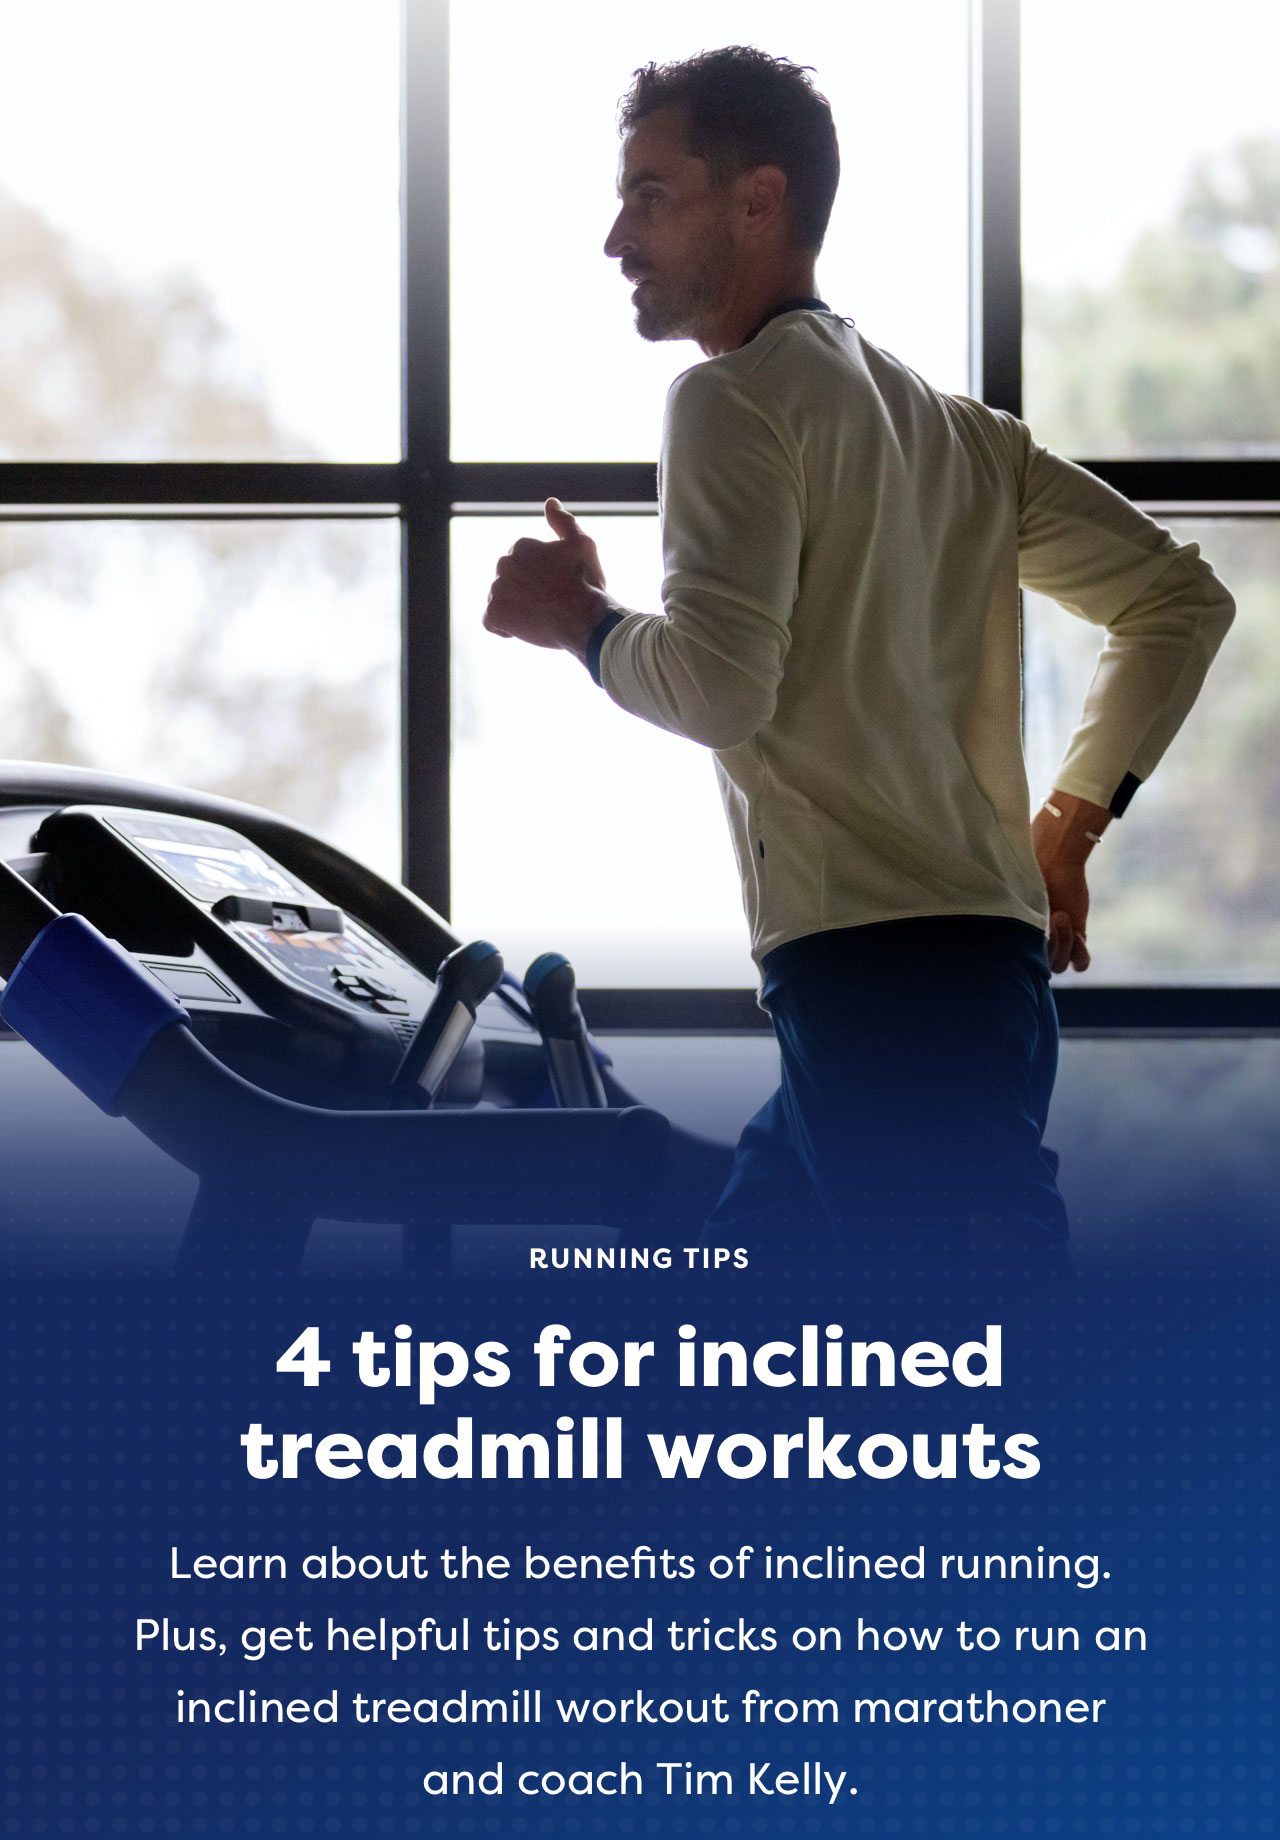 RUNNING TIPS | 4 tips for inclined treadmill workouts | Learn about the benefits of inclined running. Plus, get helpful tips and tricks on how to run an inclined treadmill workout from marathoner and coach Tim Kelly.